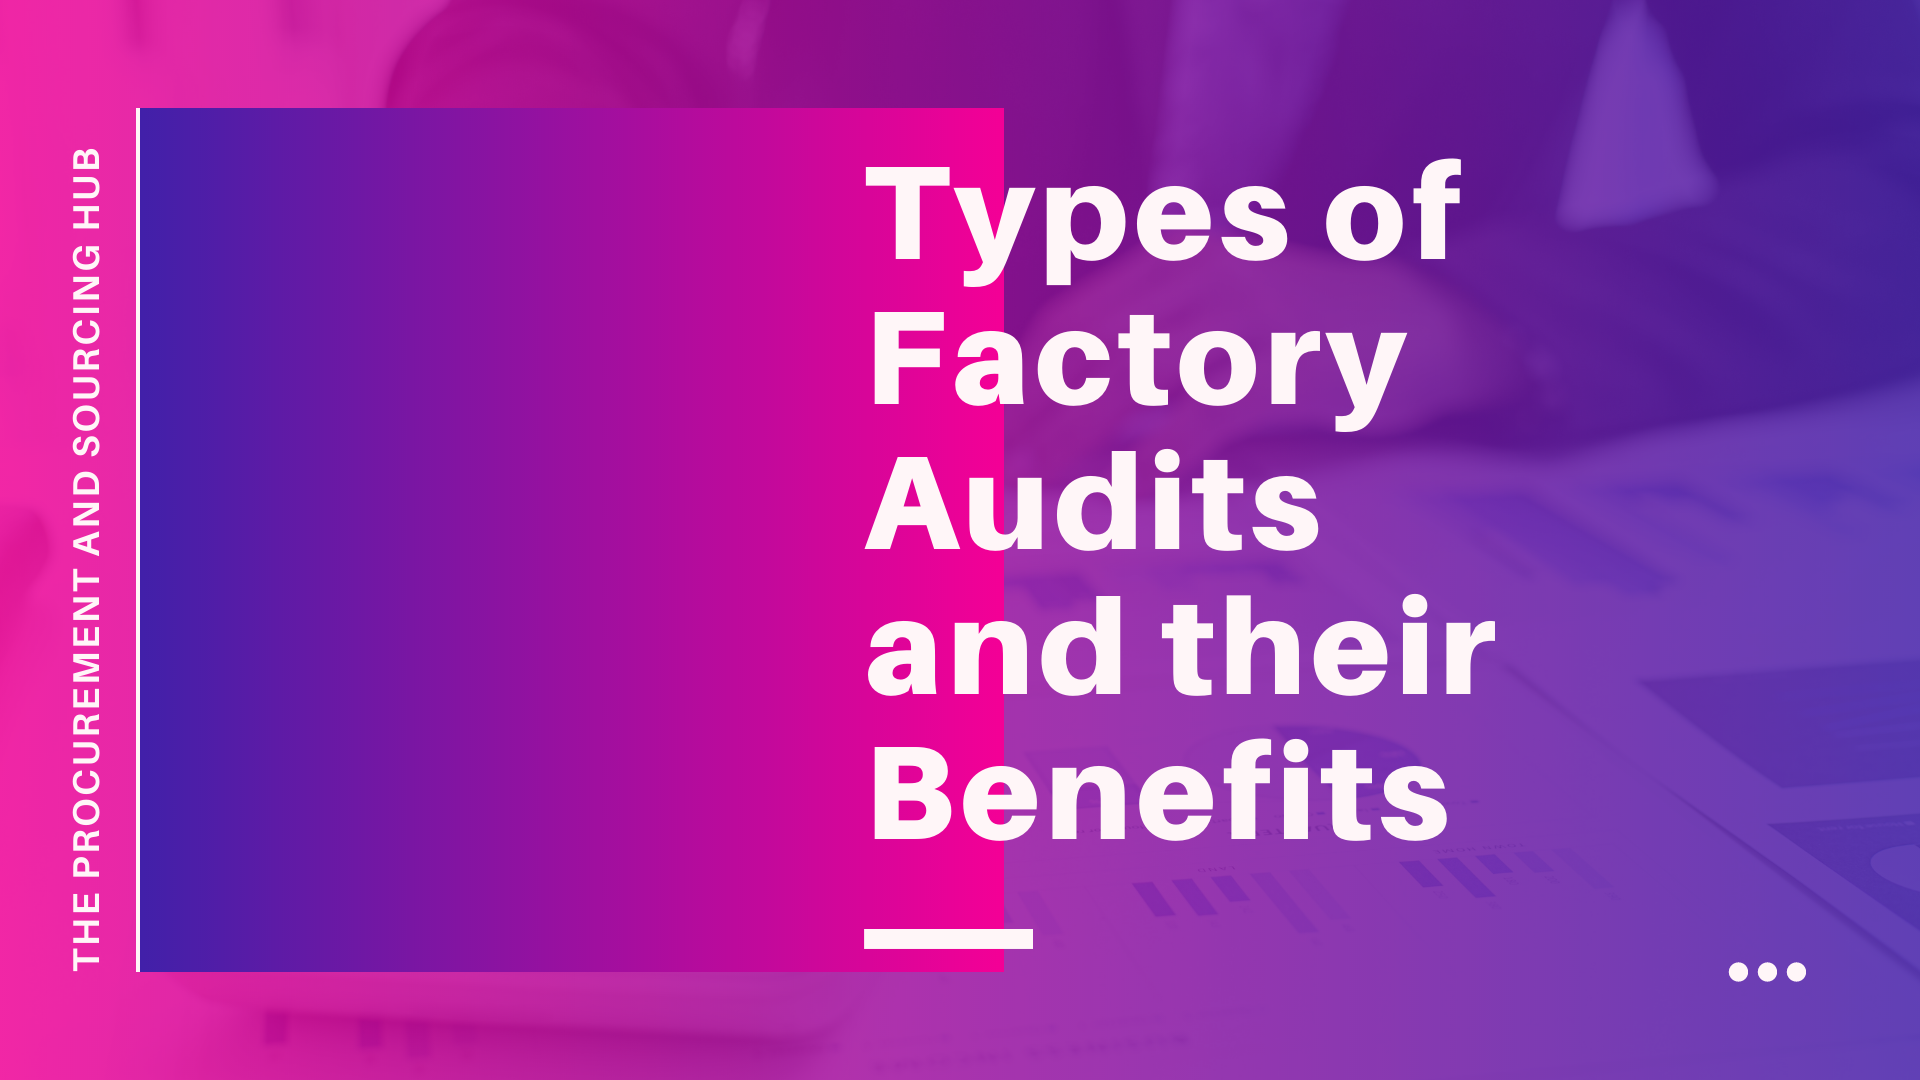 Types of Factory Audits and their Benefits